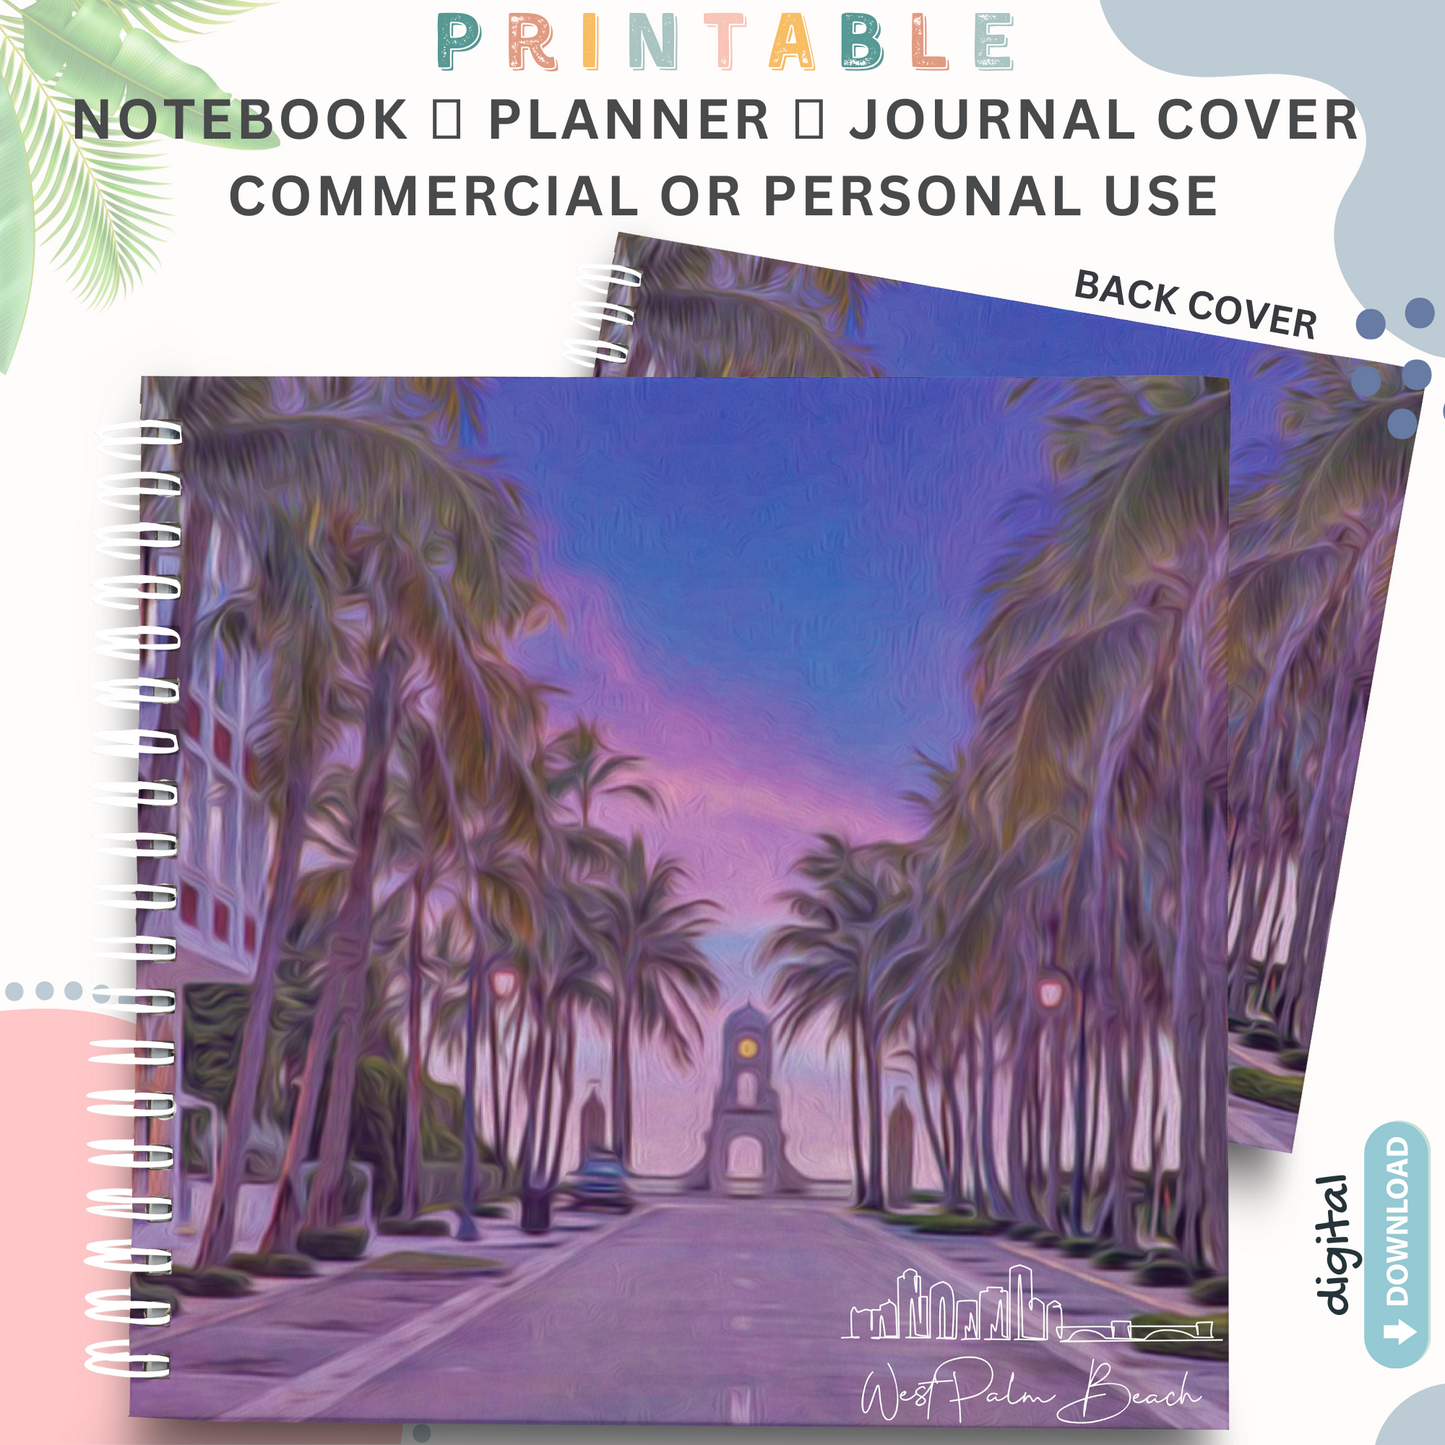 IVANA MATTHEWS´S Planner me to Palm Beach - Printable Planner, Journal & Notepad Cover